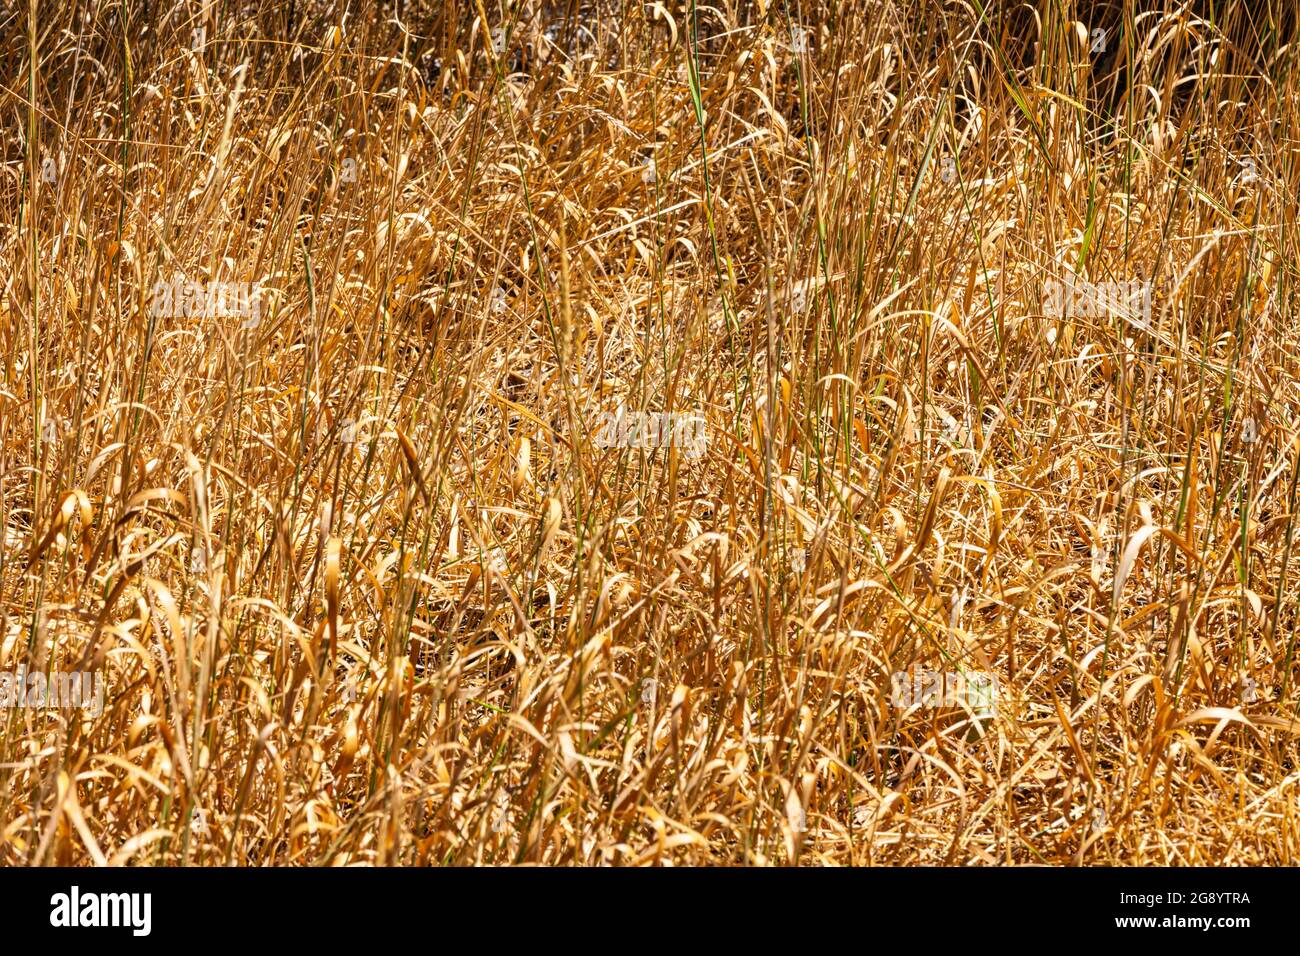 Tinder dry grass poses a wildfire risk during the drought conditions of 2021 in Kamloops British Columbia Canada Stock Photo